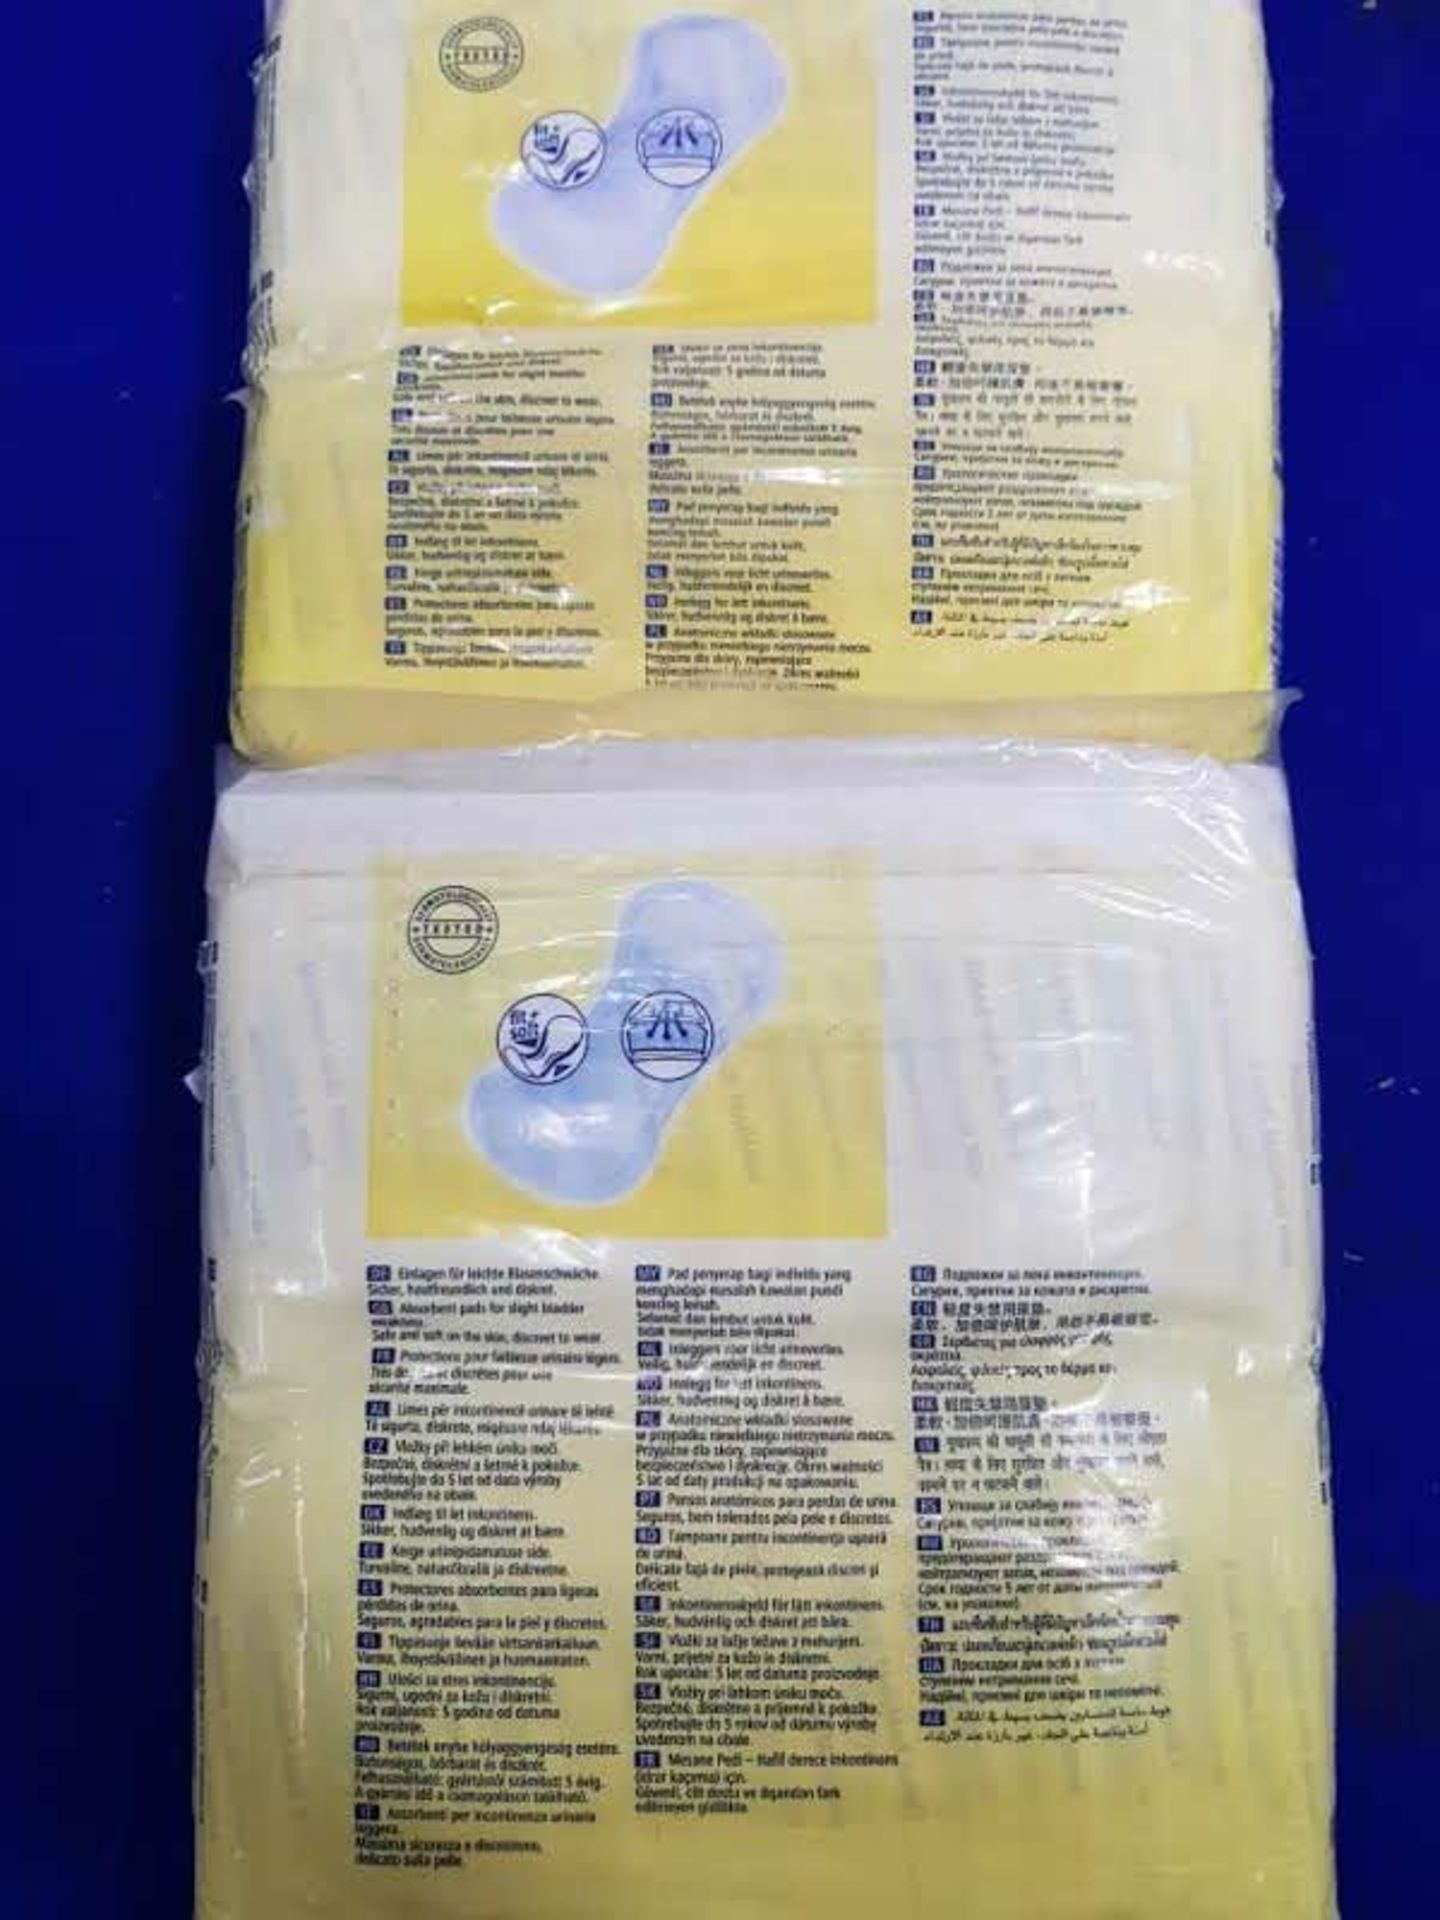 2x Packs Mixed Sizes Molimed Absorbent Pads For Slight Bladder Weekness - Image 2 of 2